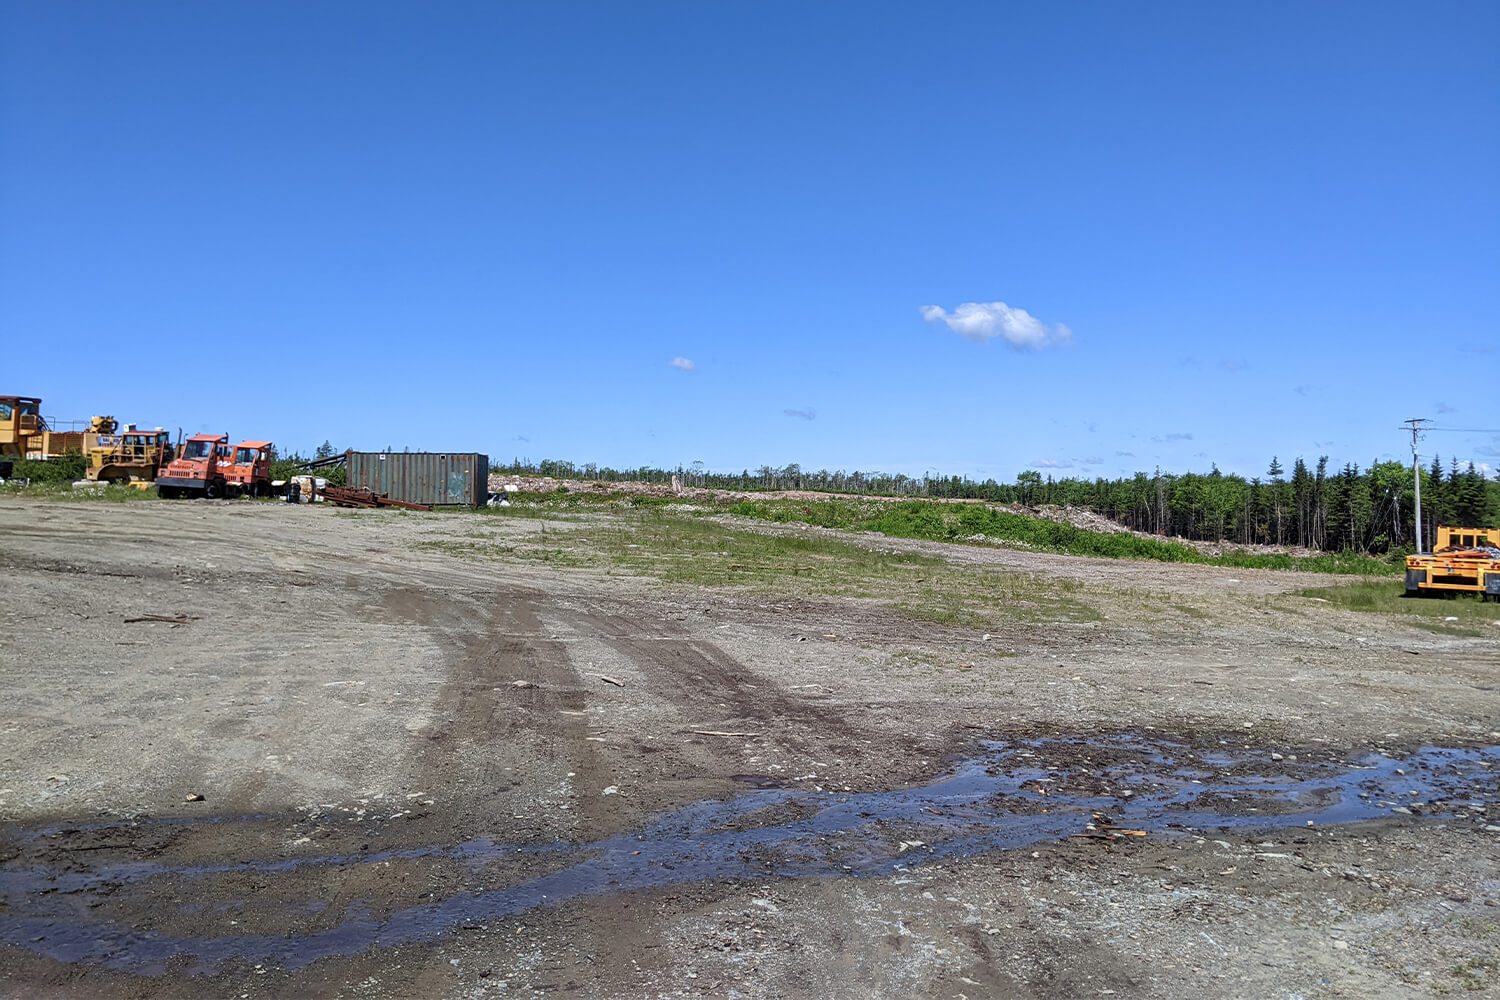 Cleared land that is currently used for equipment storage